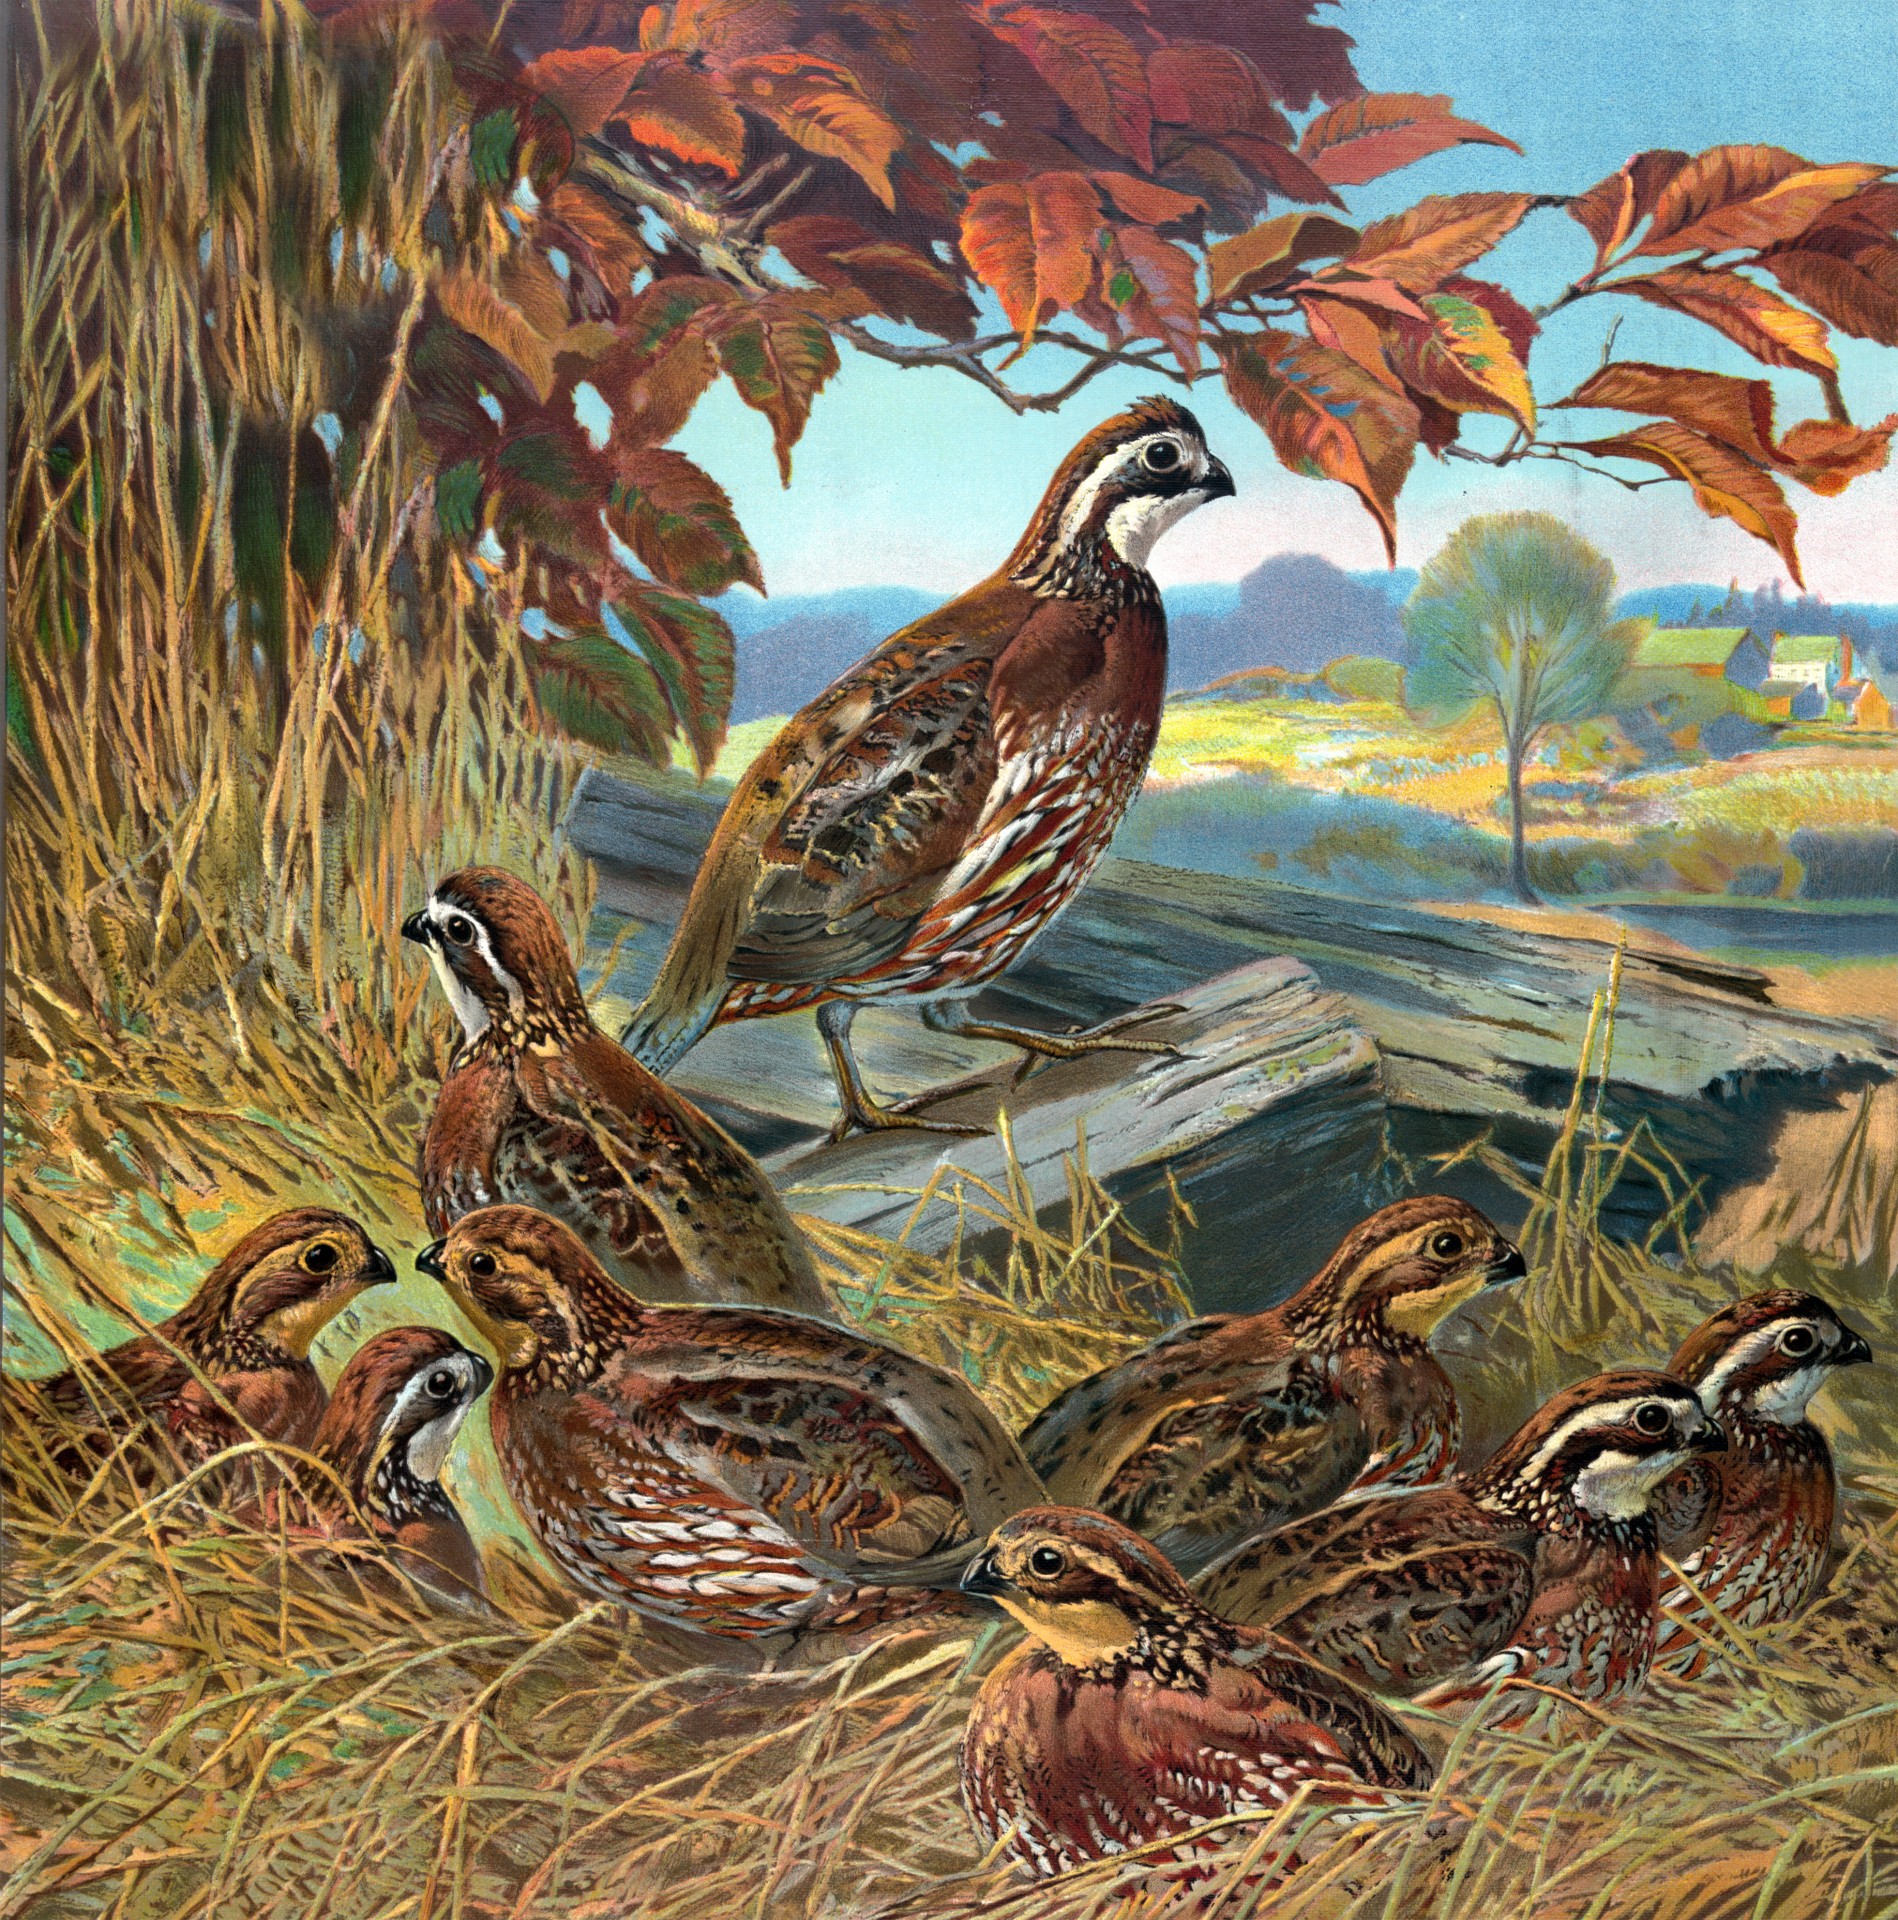 Public domain vintage painting of game birds on the nest